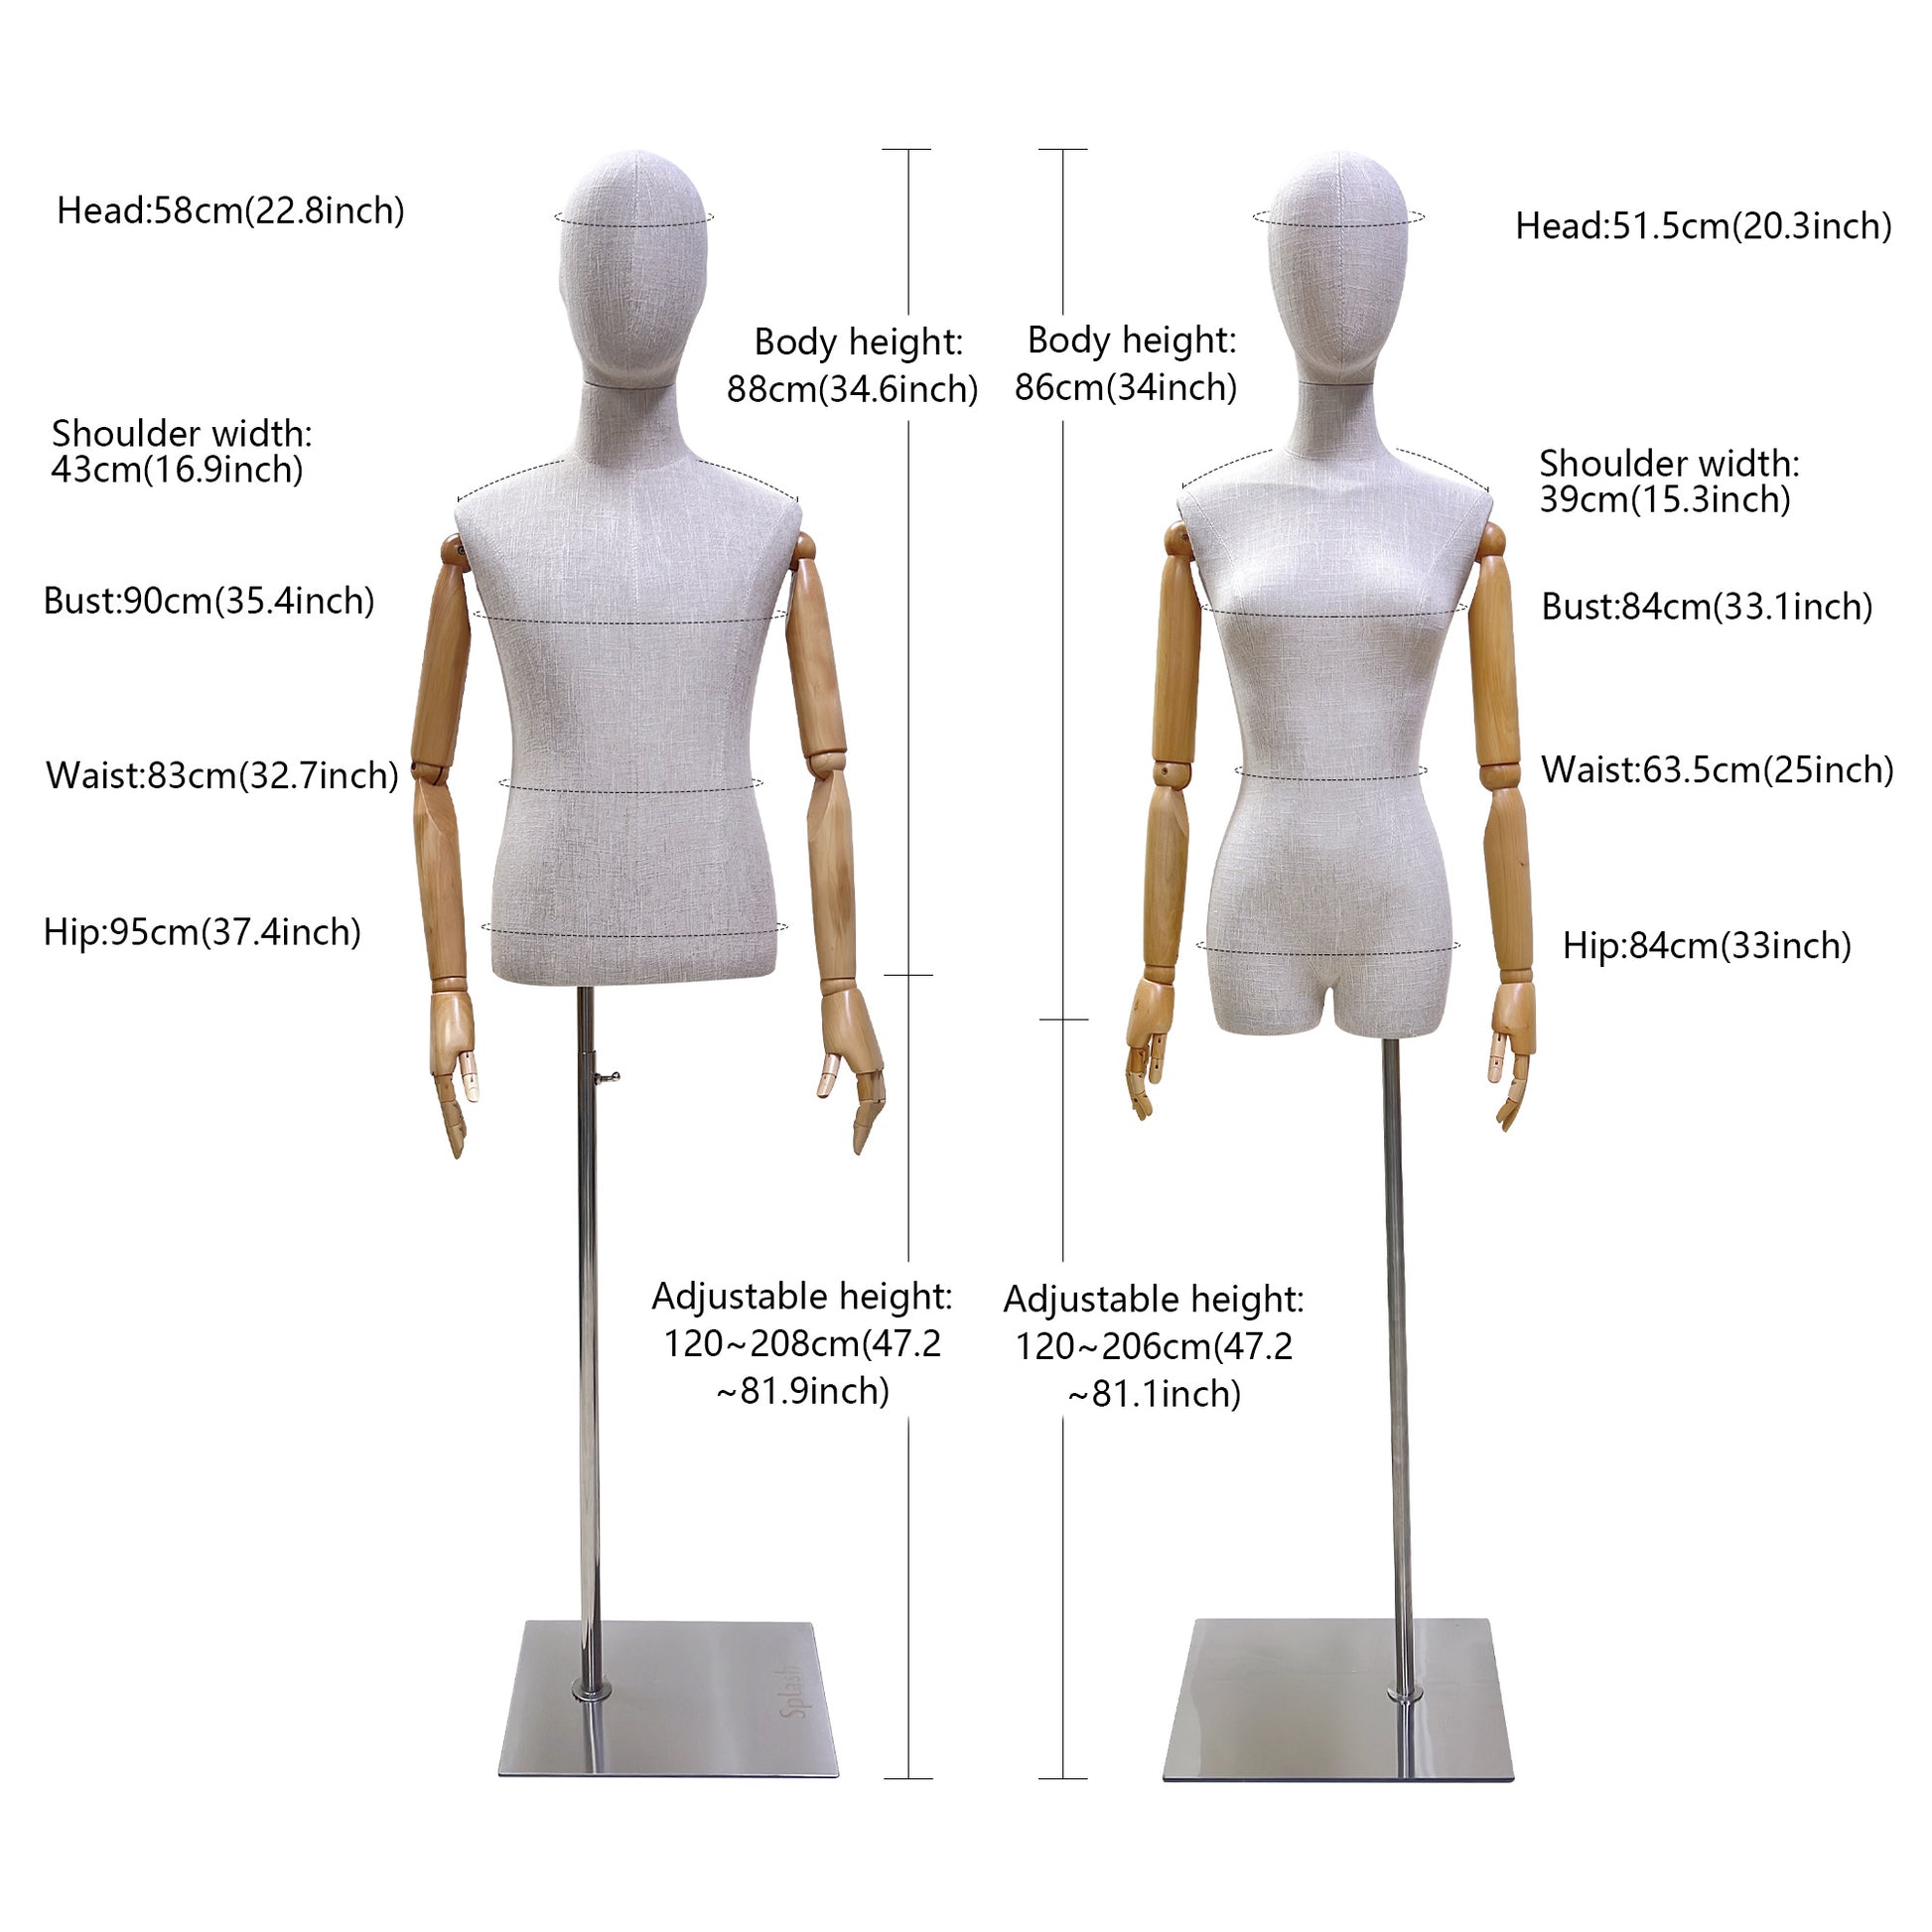 Male 3/4 Body Mannequin with Removable Arms, Grey Color